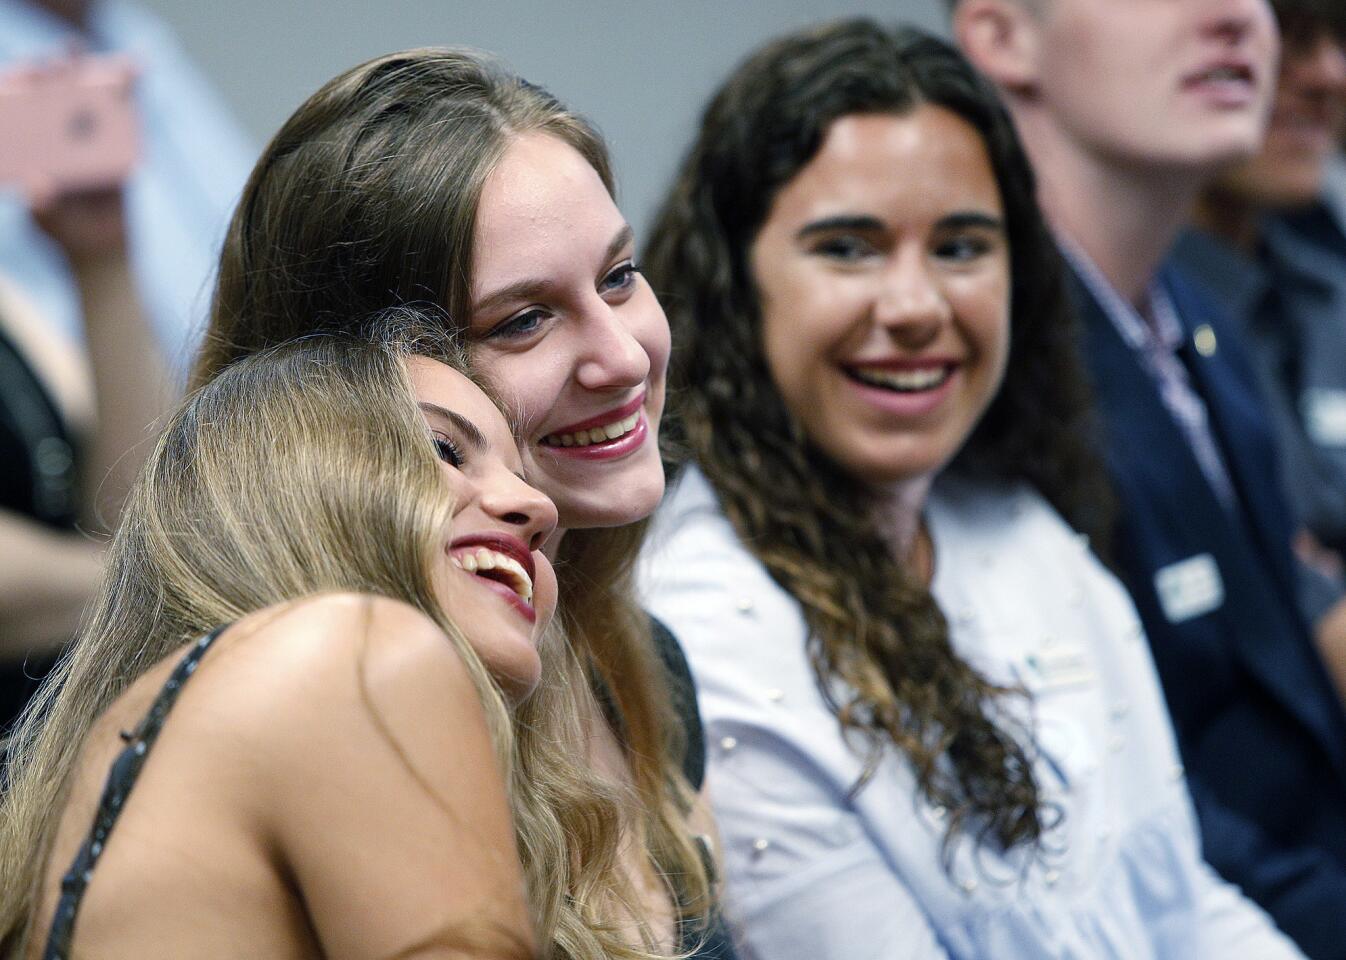 Esther Naranjo, of Madrid, Spain, laughs and puts her head on the shoulder of Veronica Muller, of La Canada High School, as they watch a video of photos of their time together at a City Council meeting on Tuesday, August 7, 2018. Participants in the La Canada Flintridge Sister Cities Association's exchange program of three students from Madrid, Spain, two students from La Canada High School, and one from St. Francis High School. The exchange students from Spain gave the City Council gifts, received certificates from Mayor Terry Walker, and watched a video of photos of their adventures.